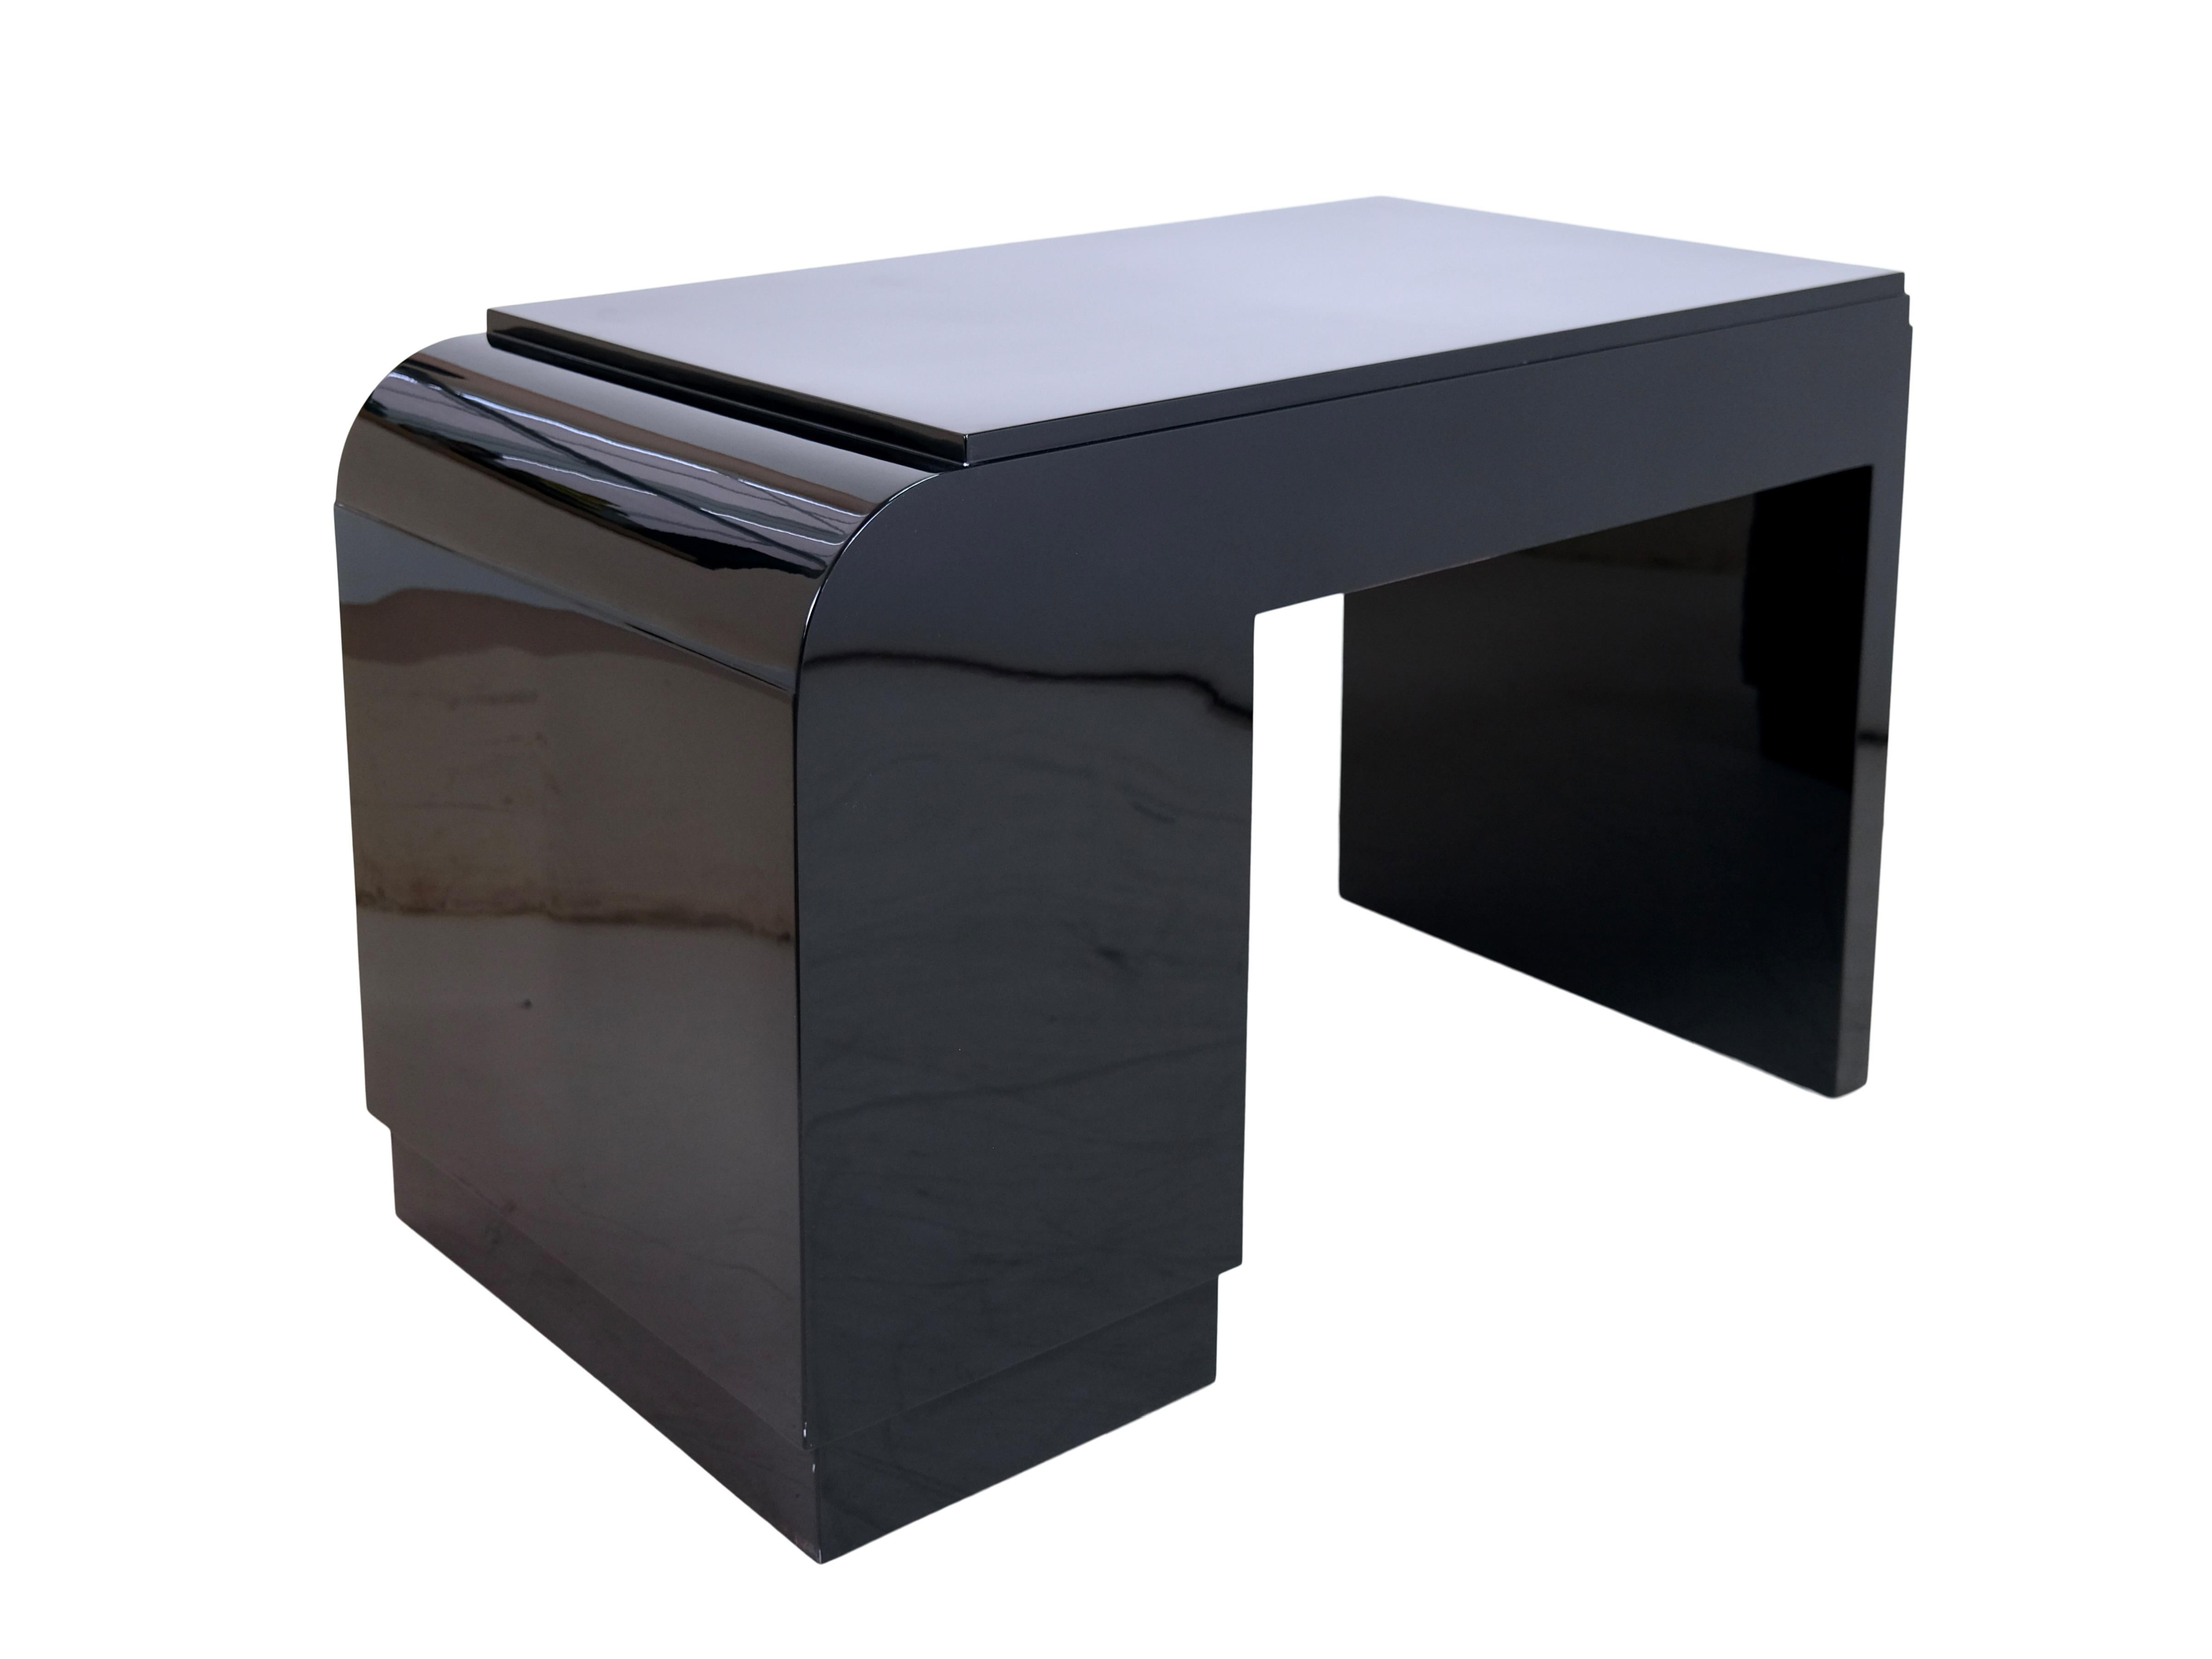 Asymmetric Rounded 1930s French Art Deco Desk in Black Lacquer with Special Lock For Sale 1